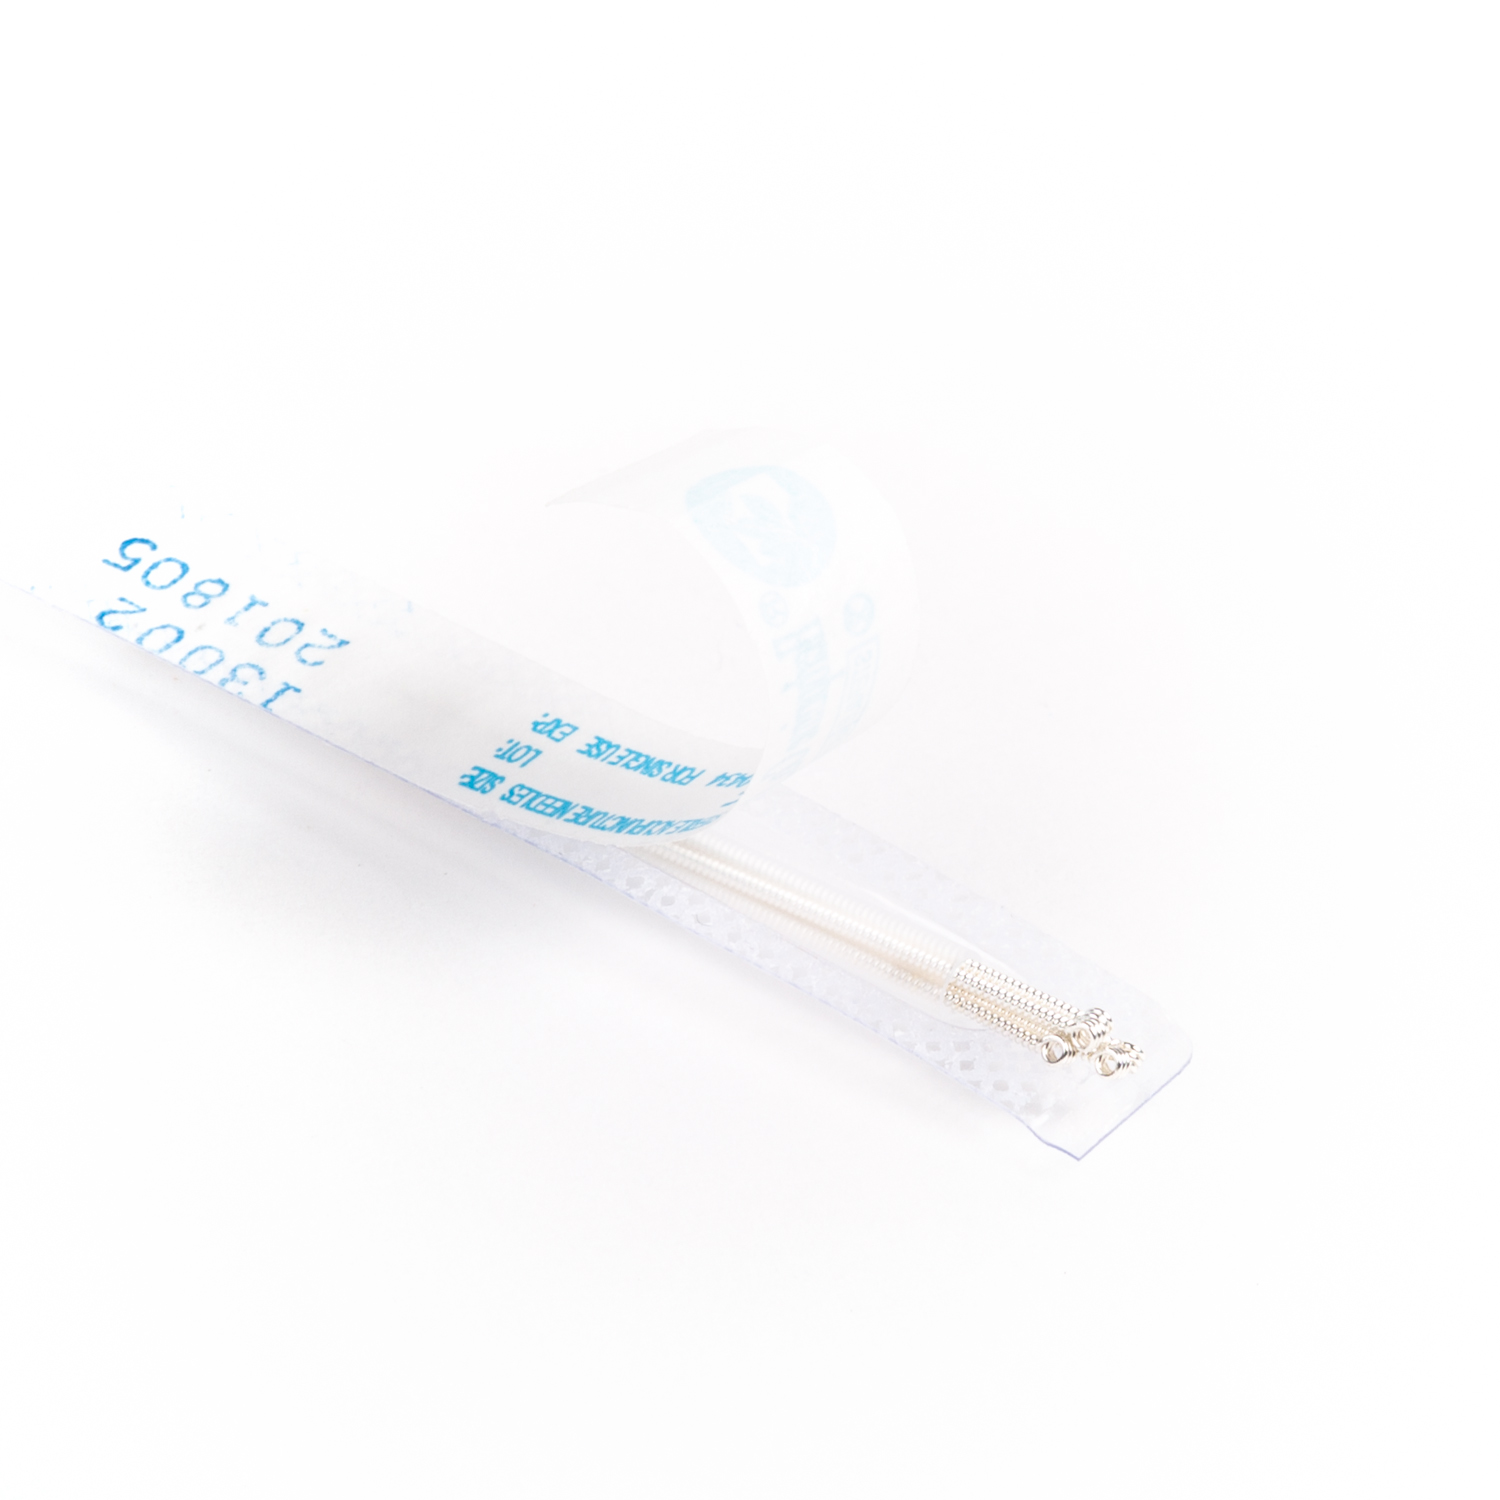 Altra Silicone Free Silver Handle Needle Cluster Pack (SL-Type) 500 Needles